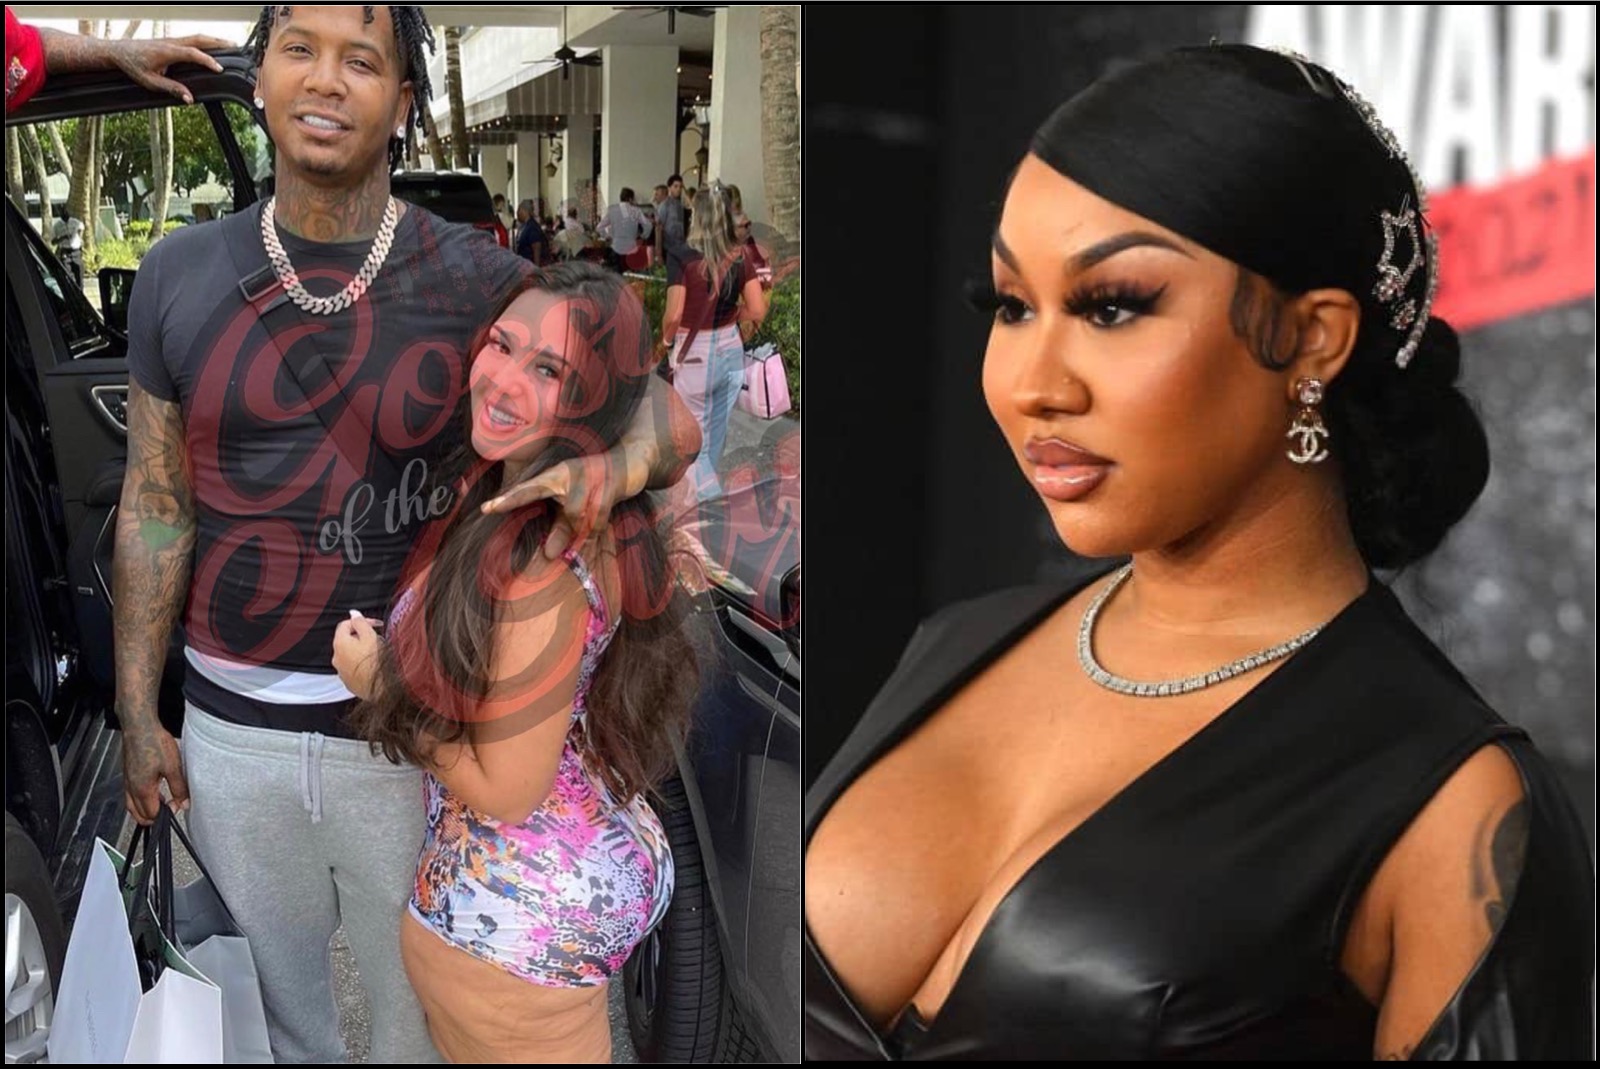 Latina Model Drops Bombshell About Having Relations With Moneybagg Yo While He Was Dating Ari